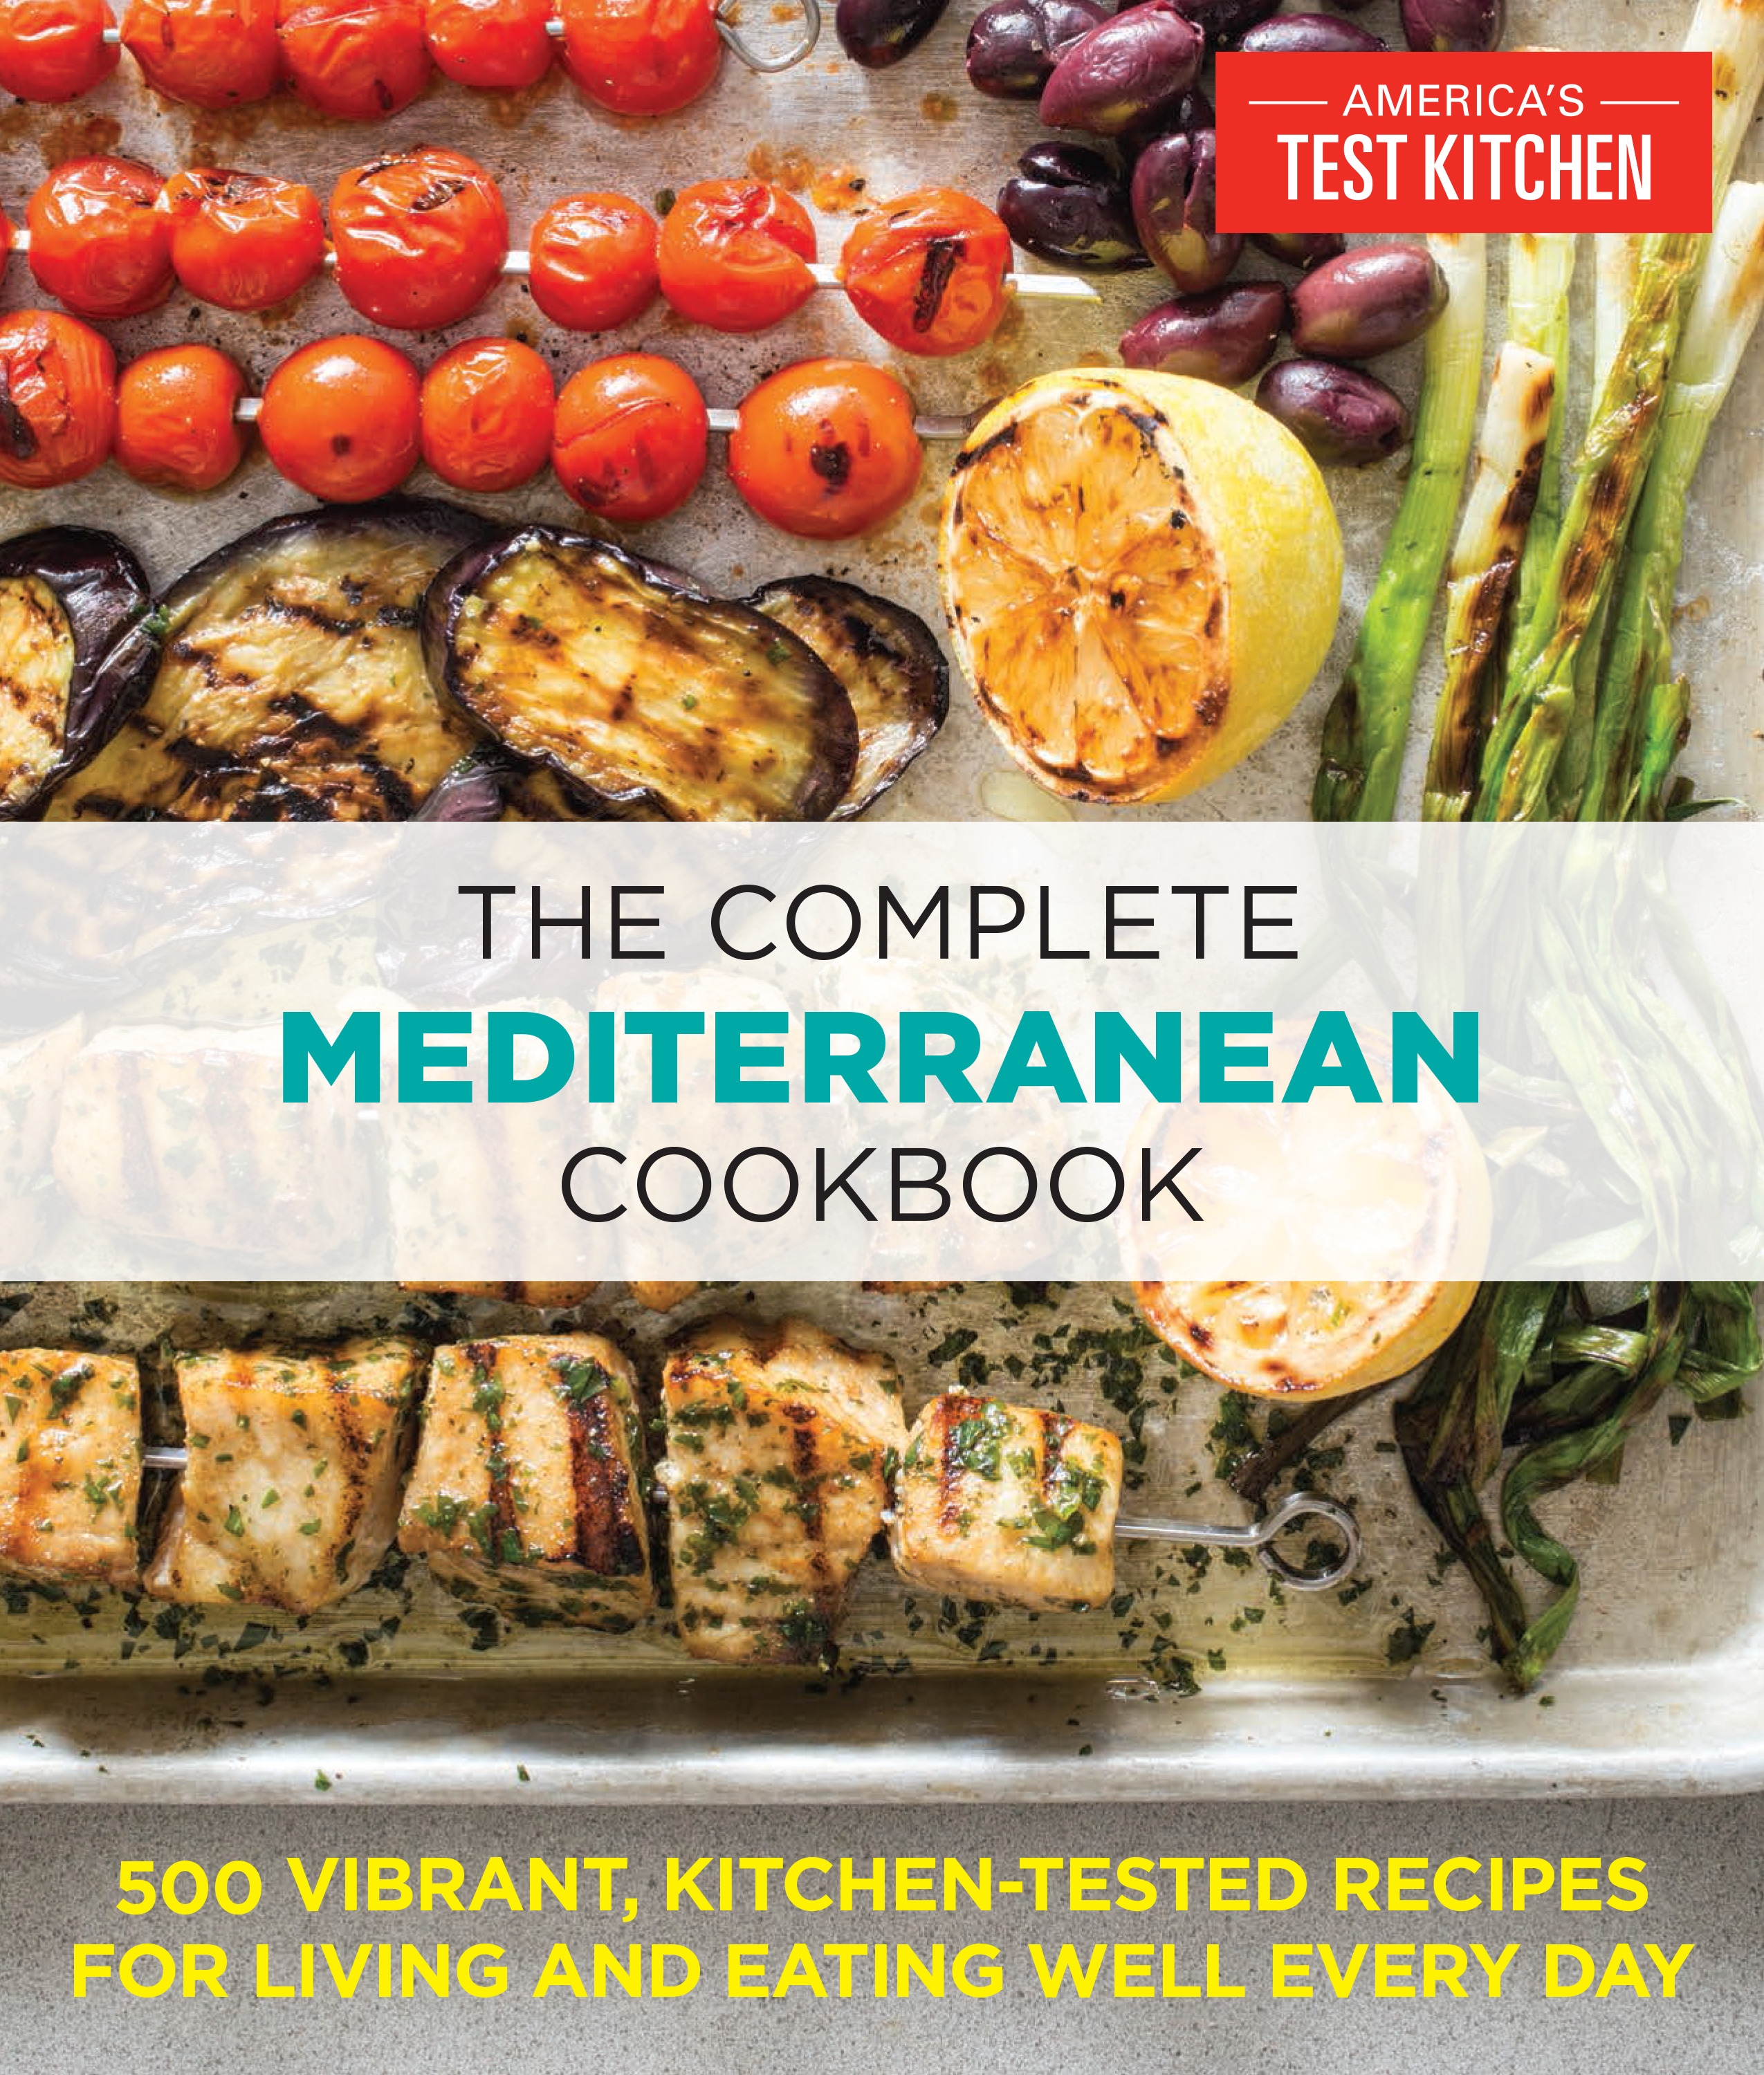 The Complete Mediterranean Cookbook By THE EDITORS AT AMERICAS